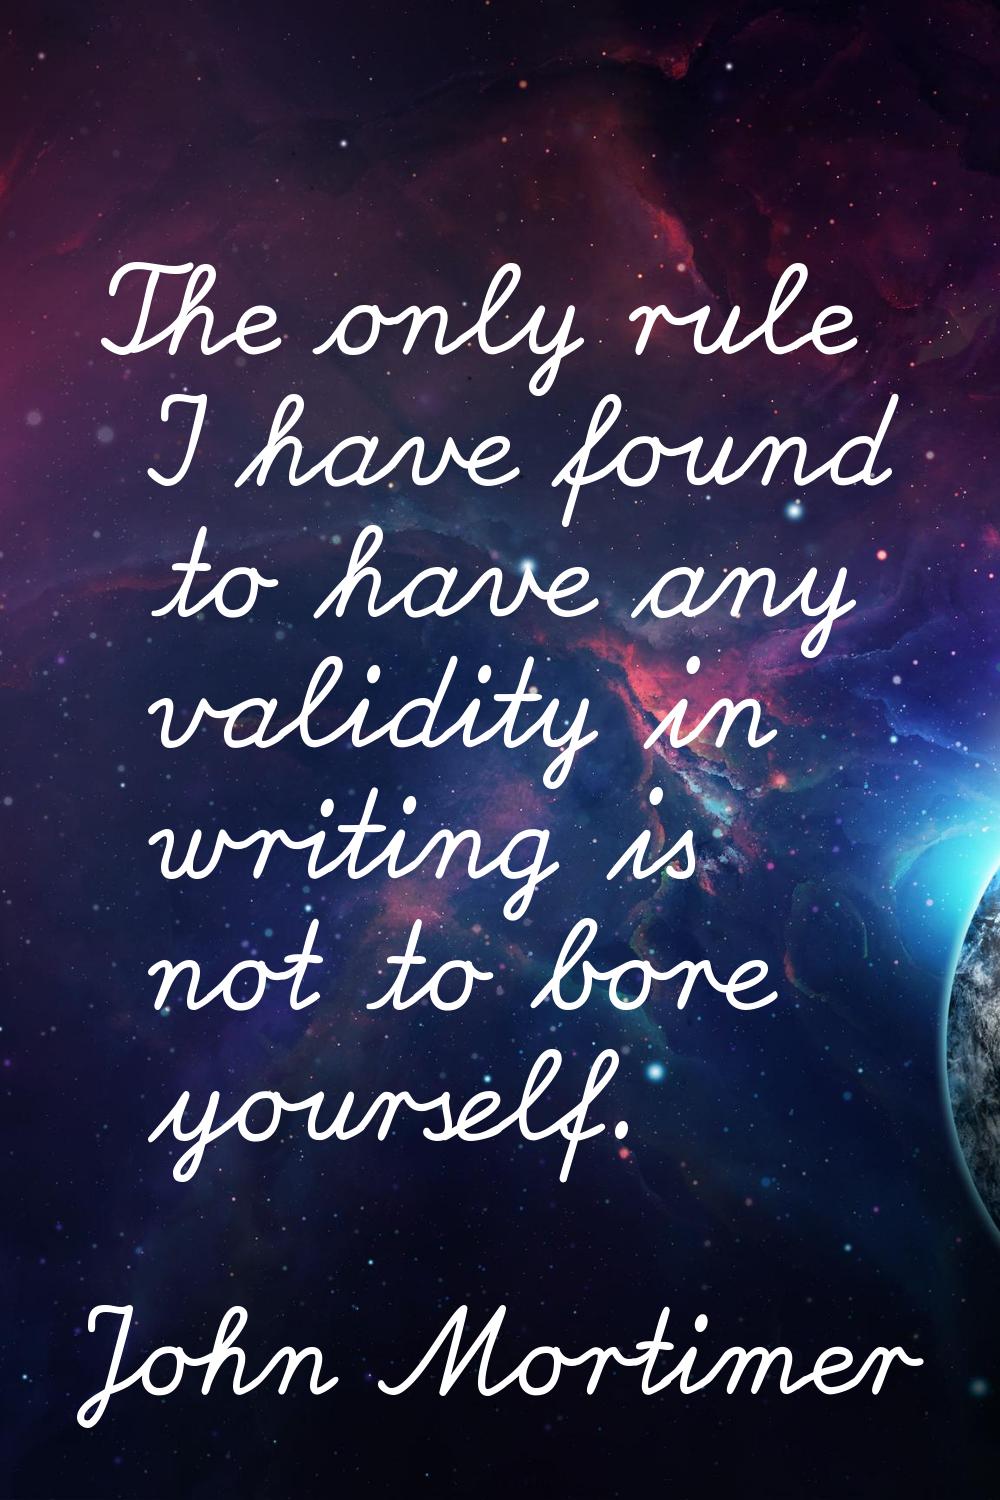 The only rule I have found to have any validity in writing is not to bore yourself.